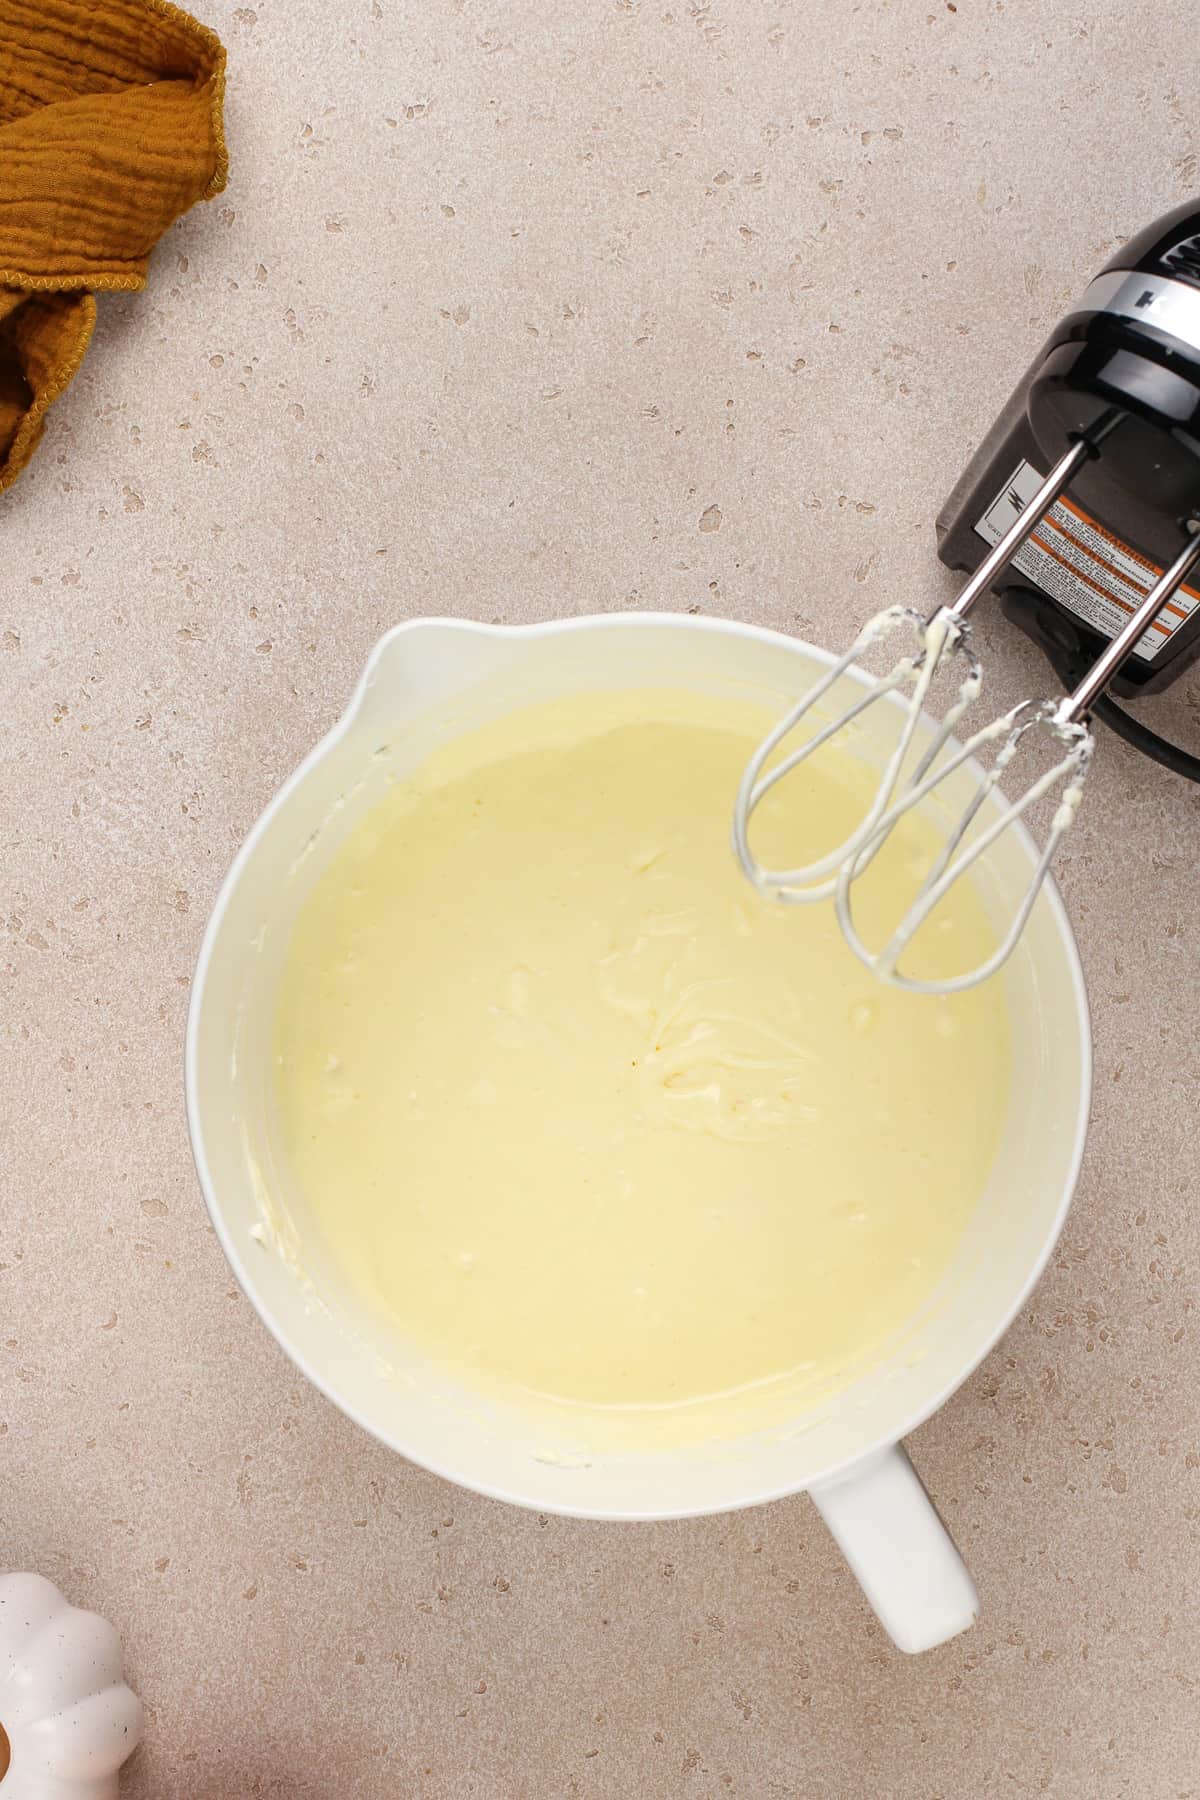 Eggs added to cream cheese and sugar in a white mixing bowl.